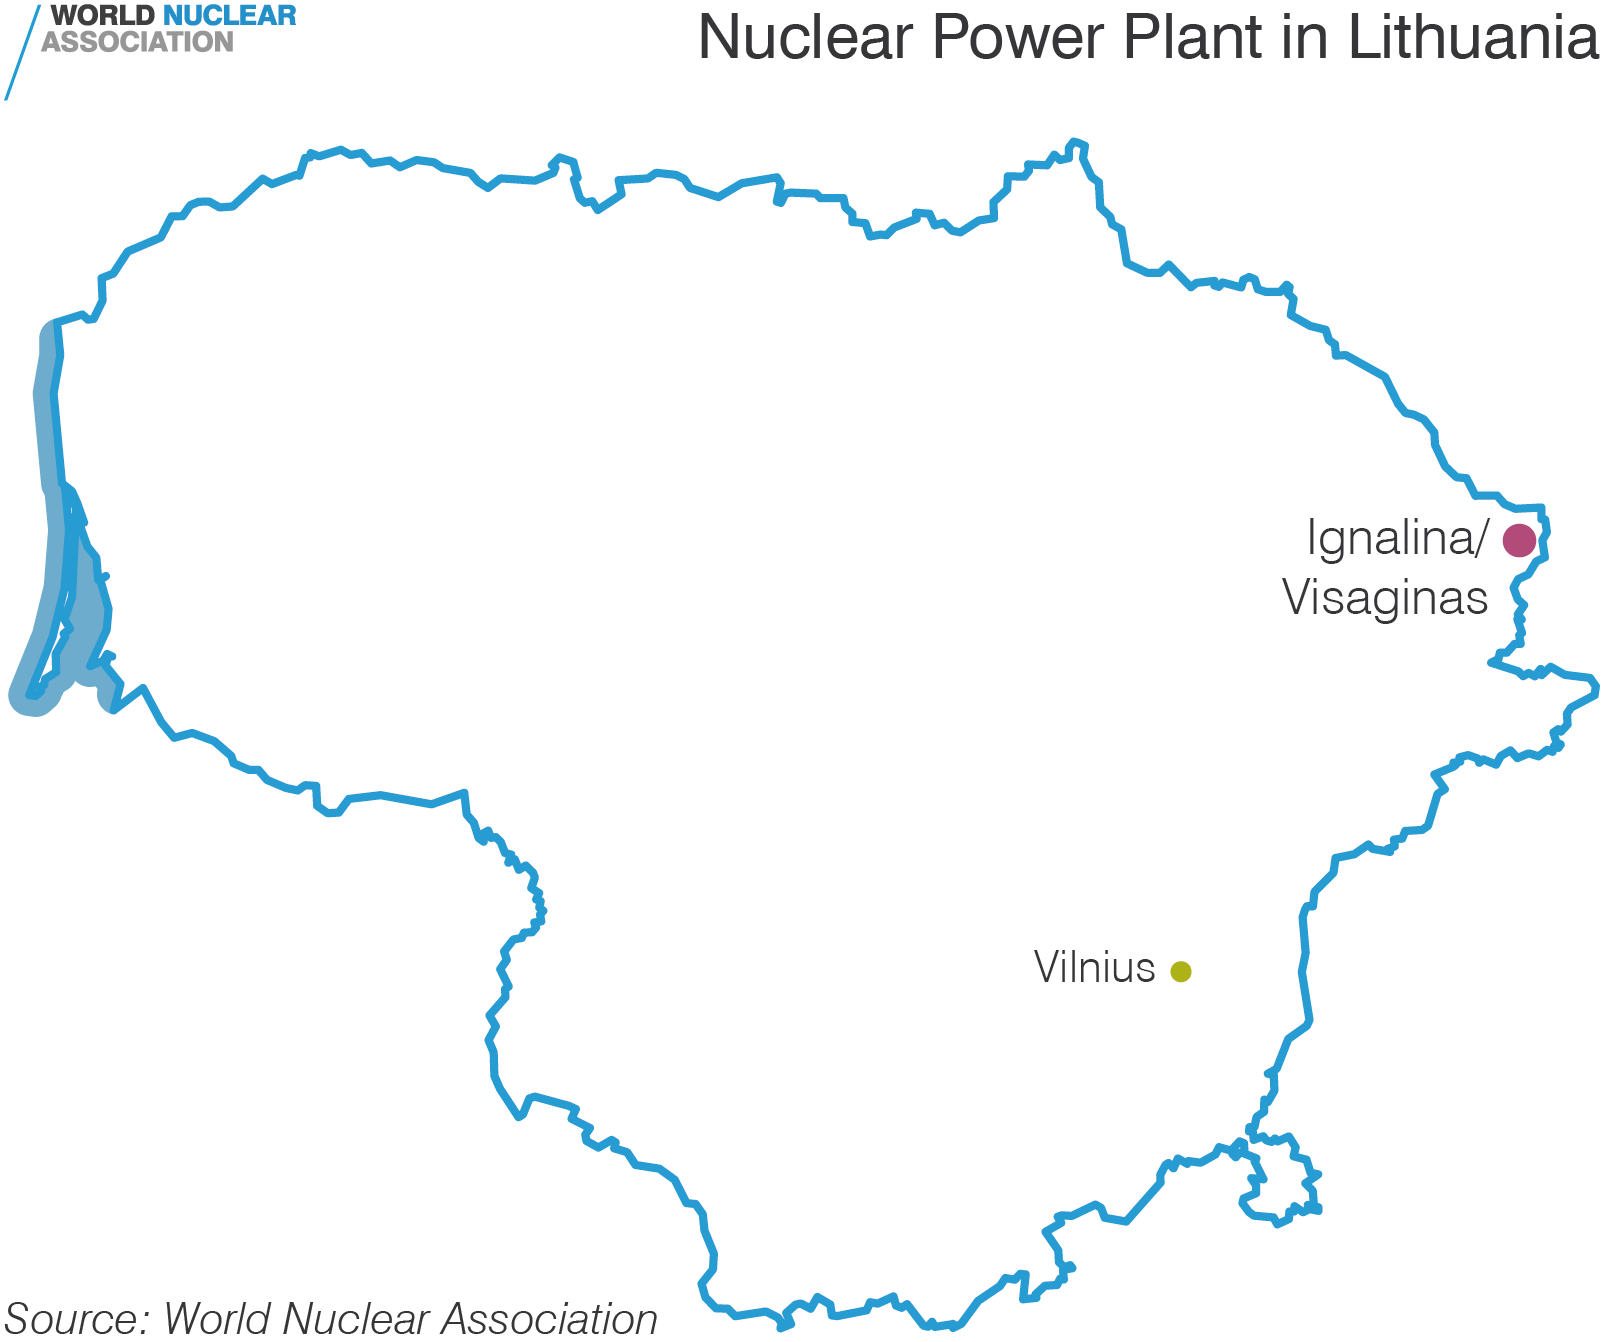 Nuclear Power Plants in Lithuania